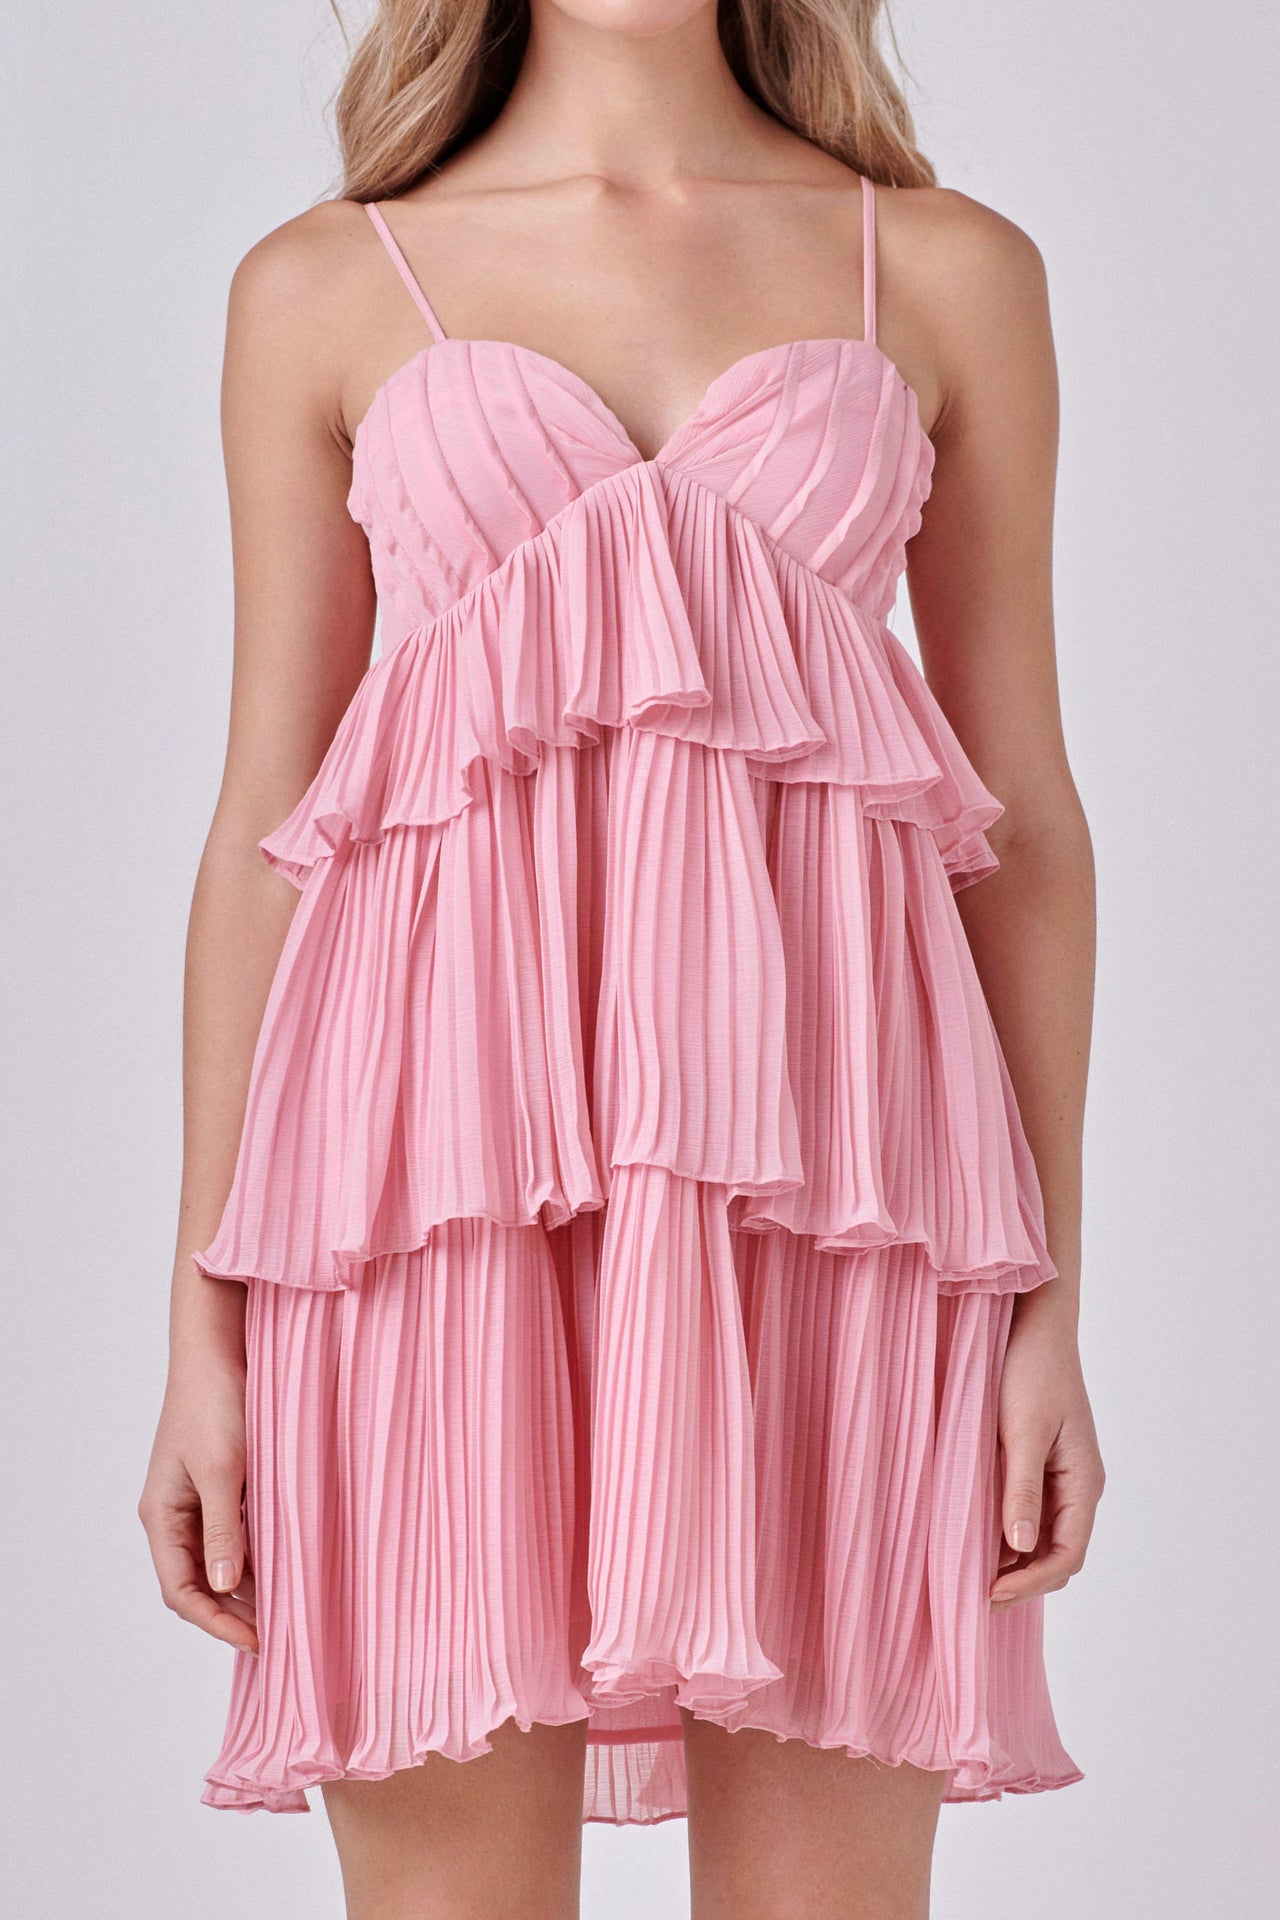 Endless Rose - Chiffon Pleated Corset Mini Dress - Dresses in Women's Clothing available at endlessrose.com